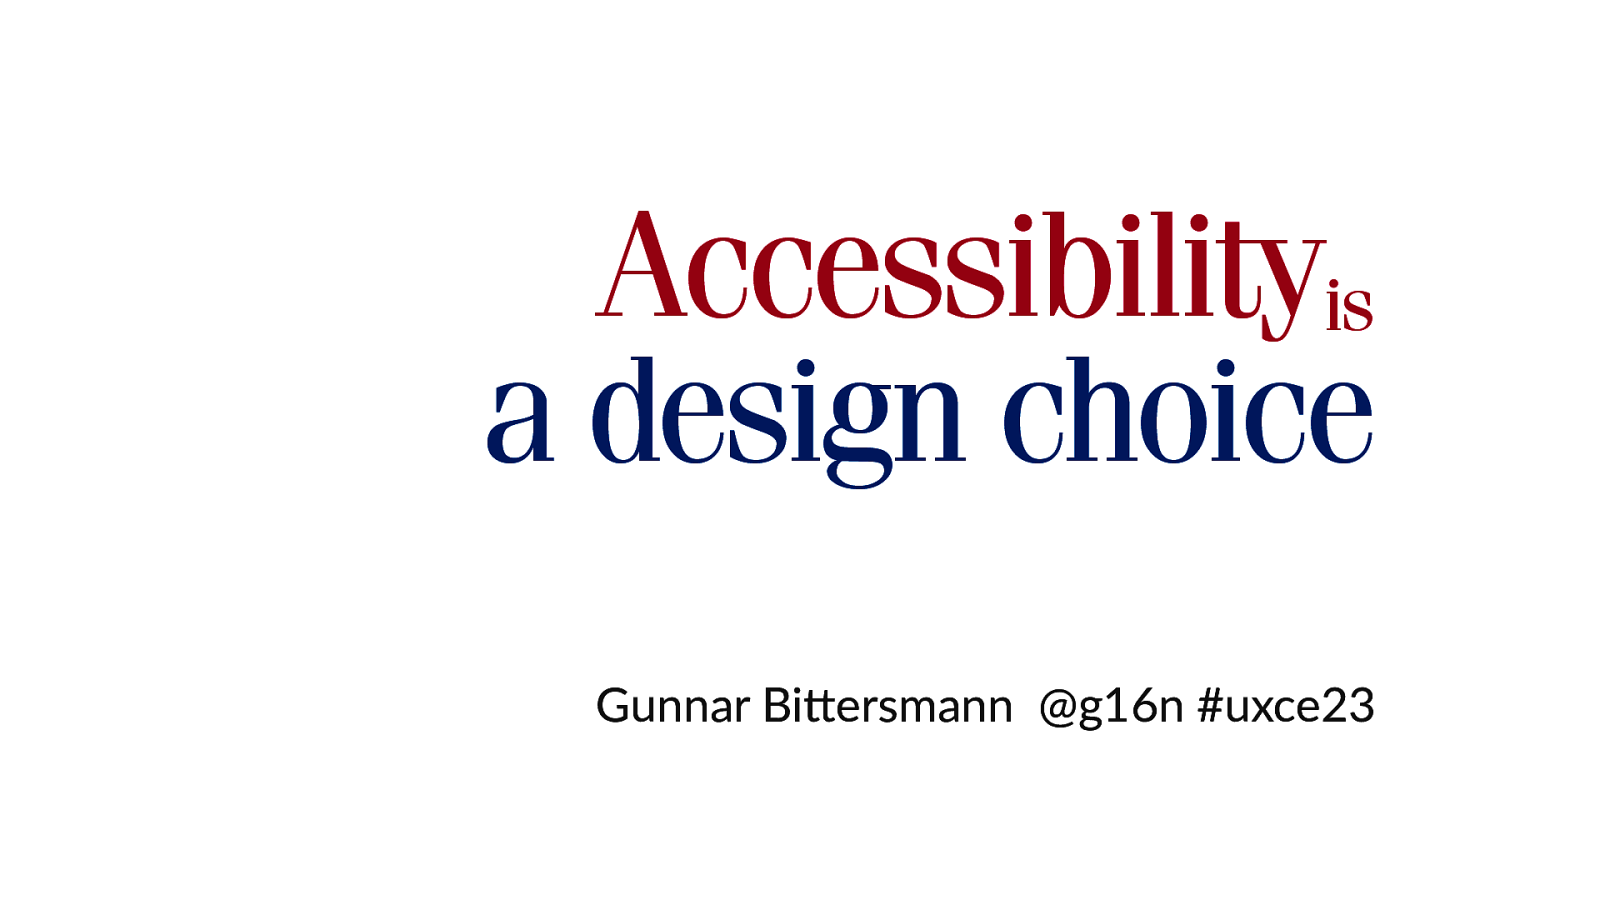 Accessibility is a design choice